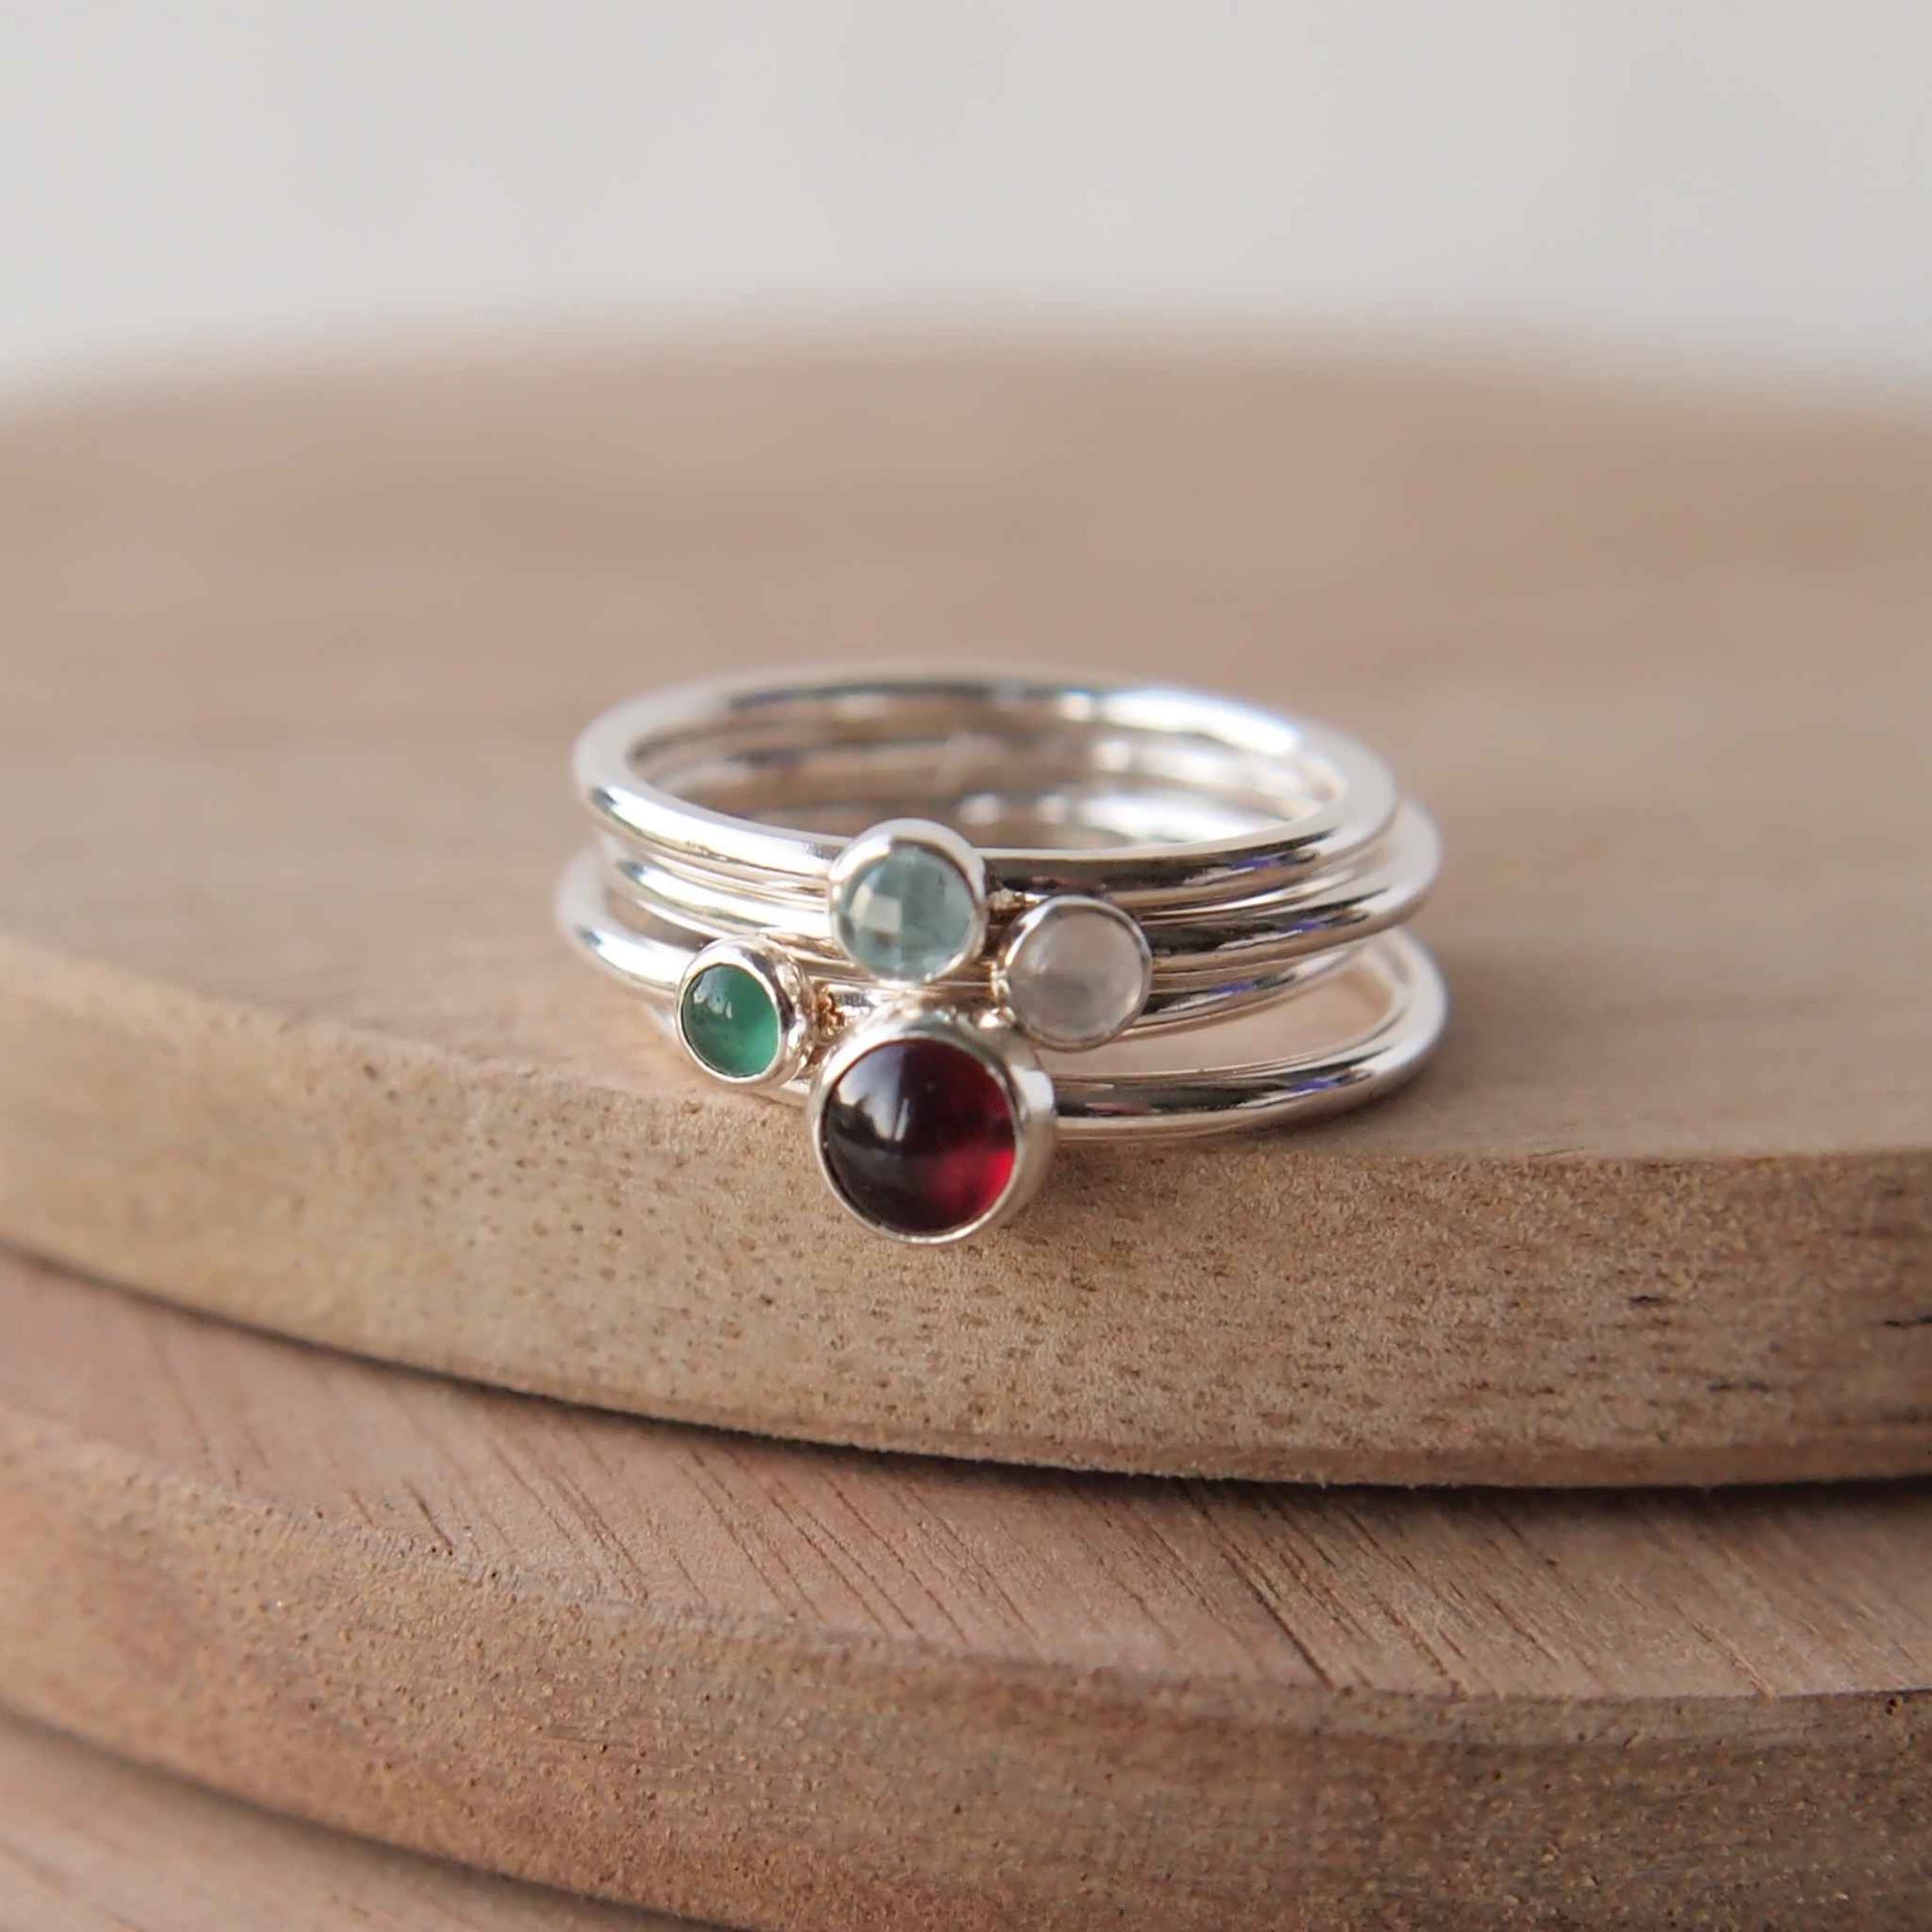 Birthstone ring set with four stones to mark family birthstones. image contains rings in sterling silver with a red garnet, green agate, white moonstone and blue topaz. Handmade by maram jewellery in Scotland UK